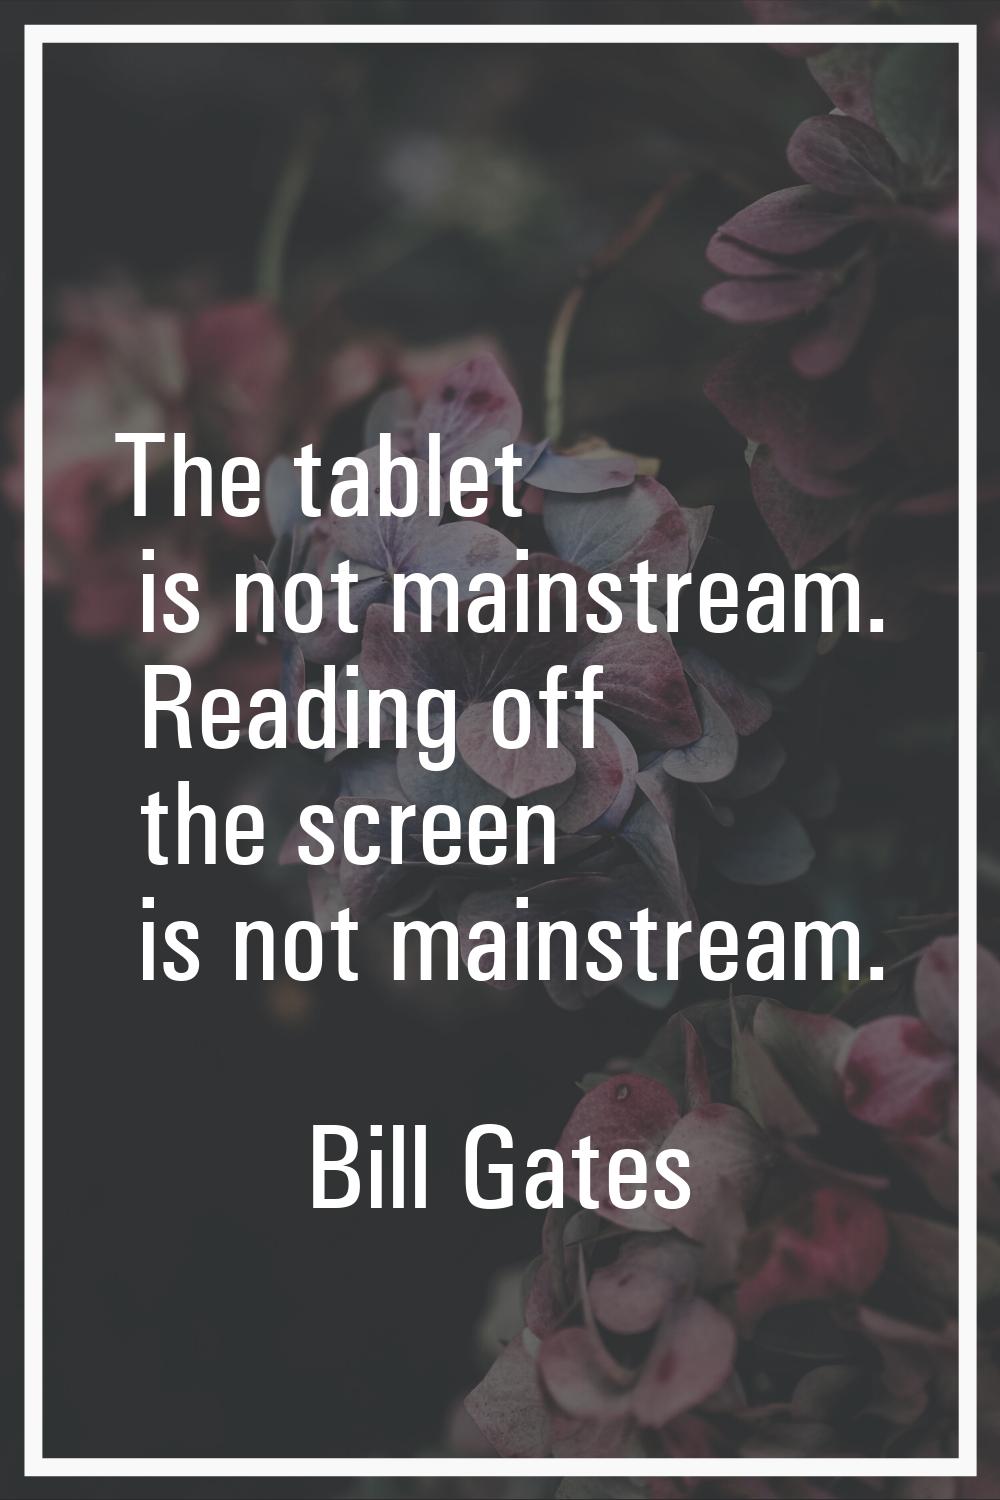 The tablet is not mainstream. Reading off the screen is not mainstream.